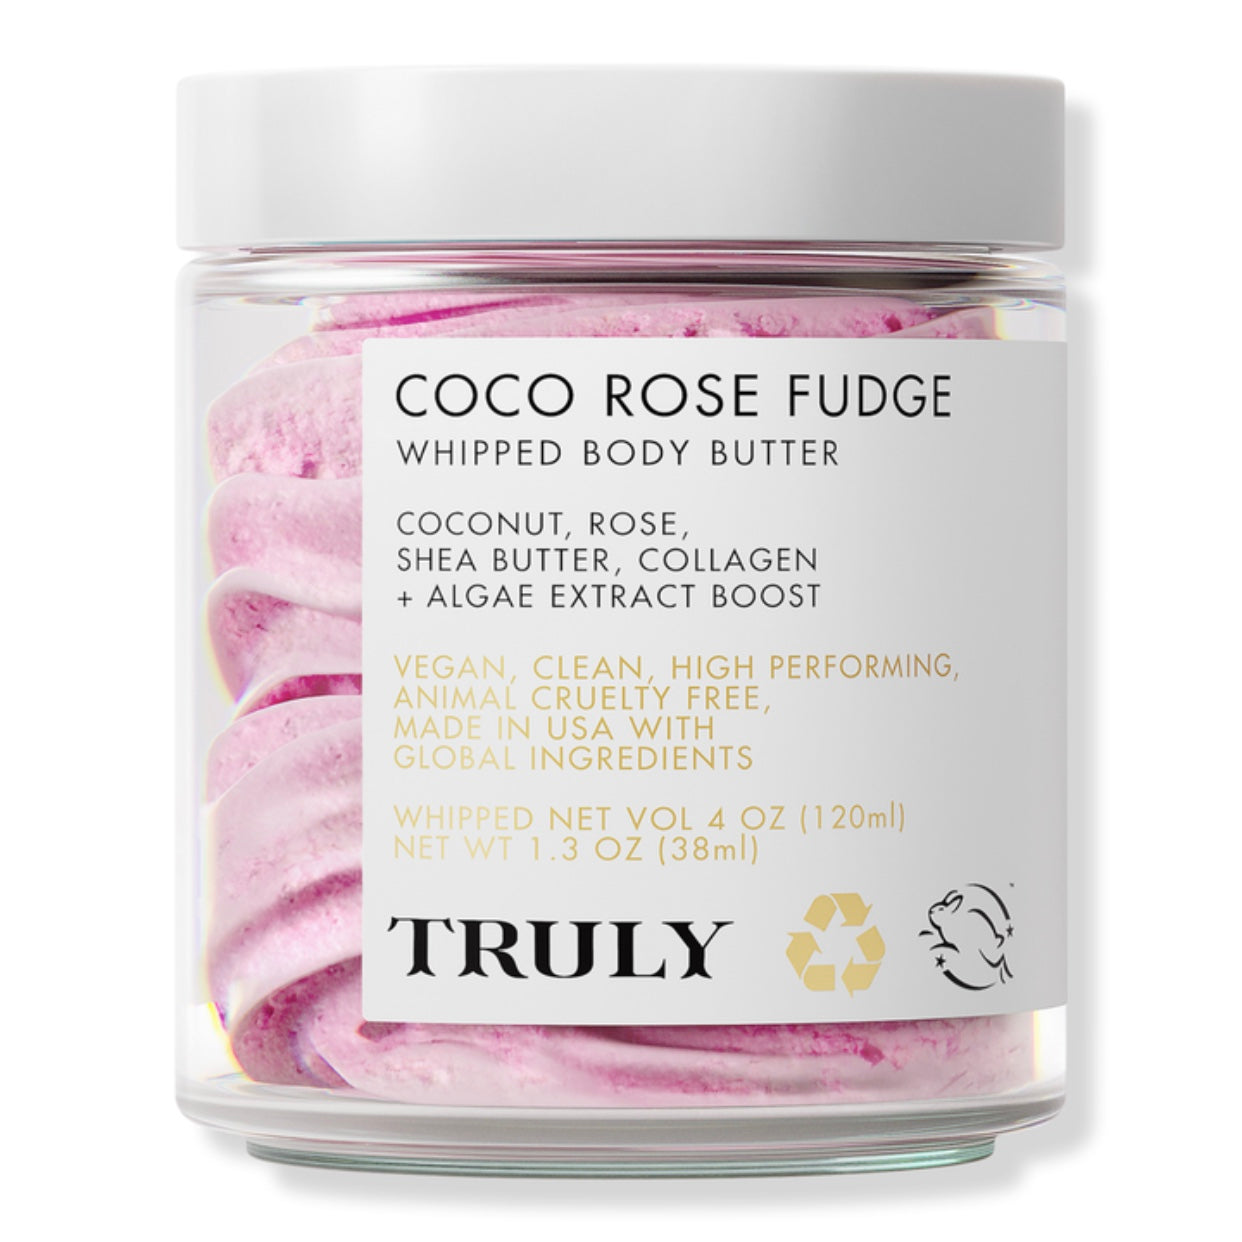 TRULY - Coco Rose Fudge Whipped Body Butter | 38 mL